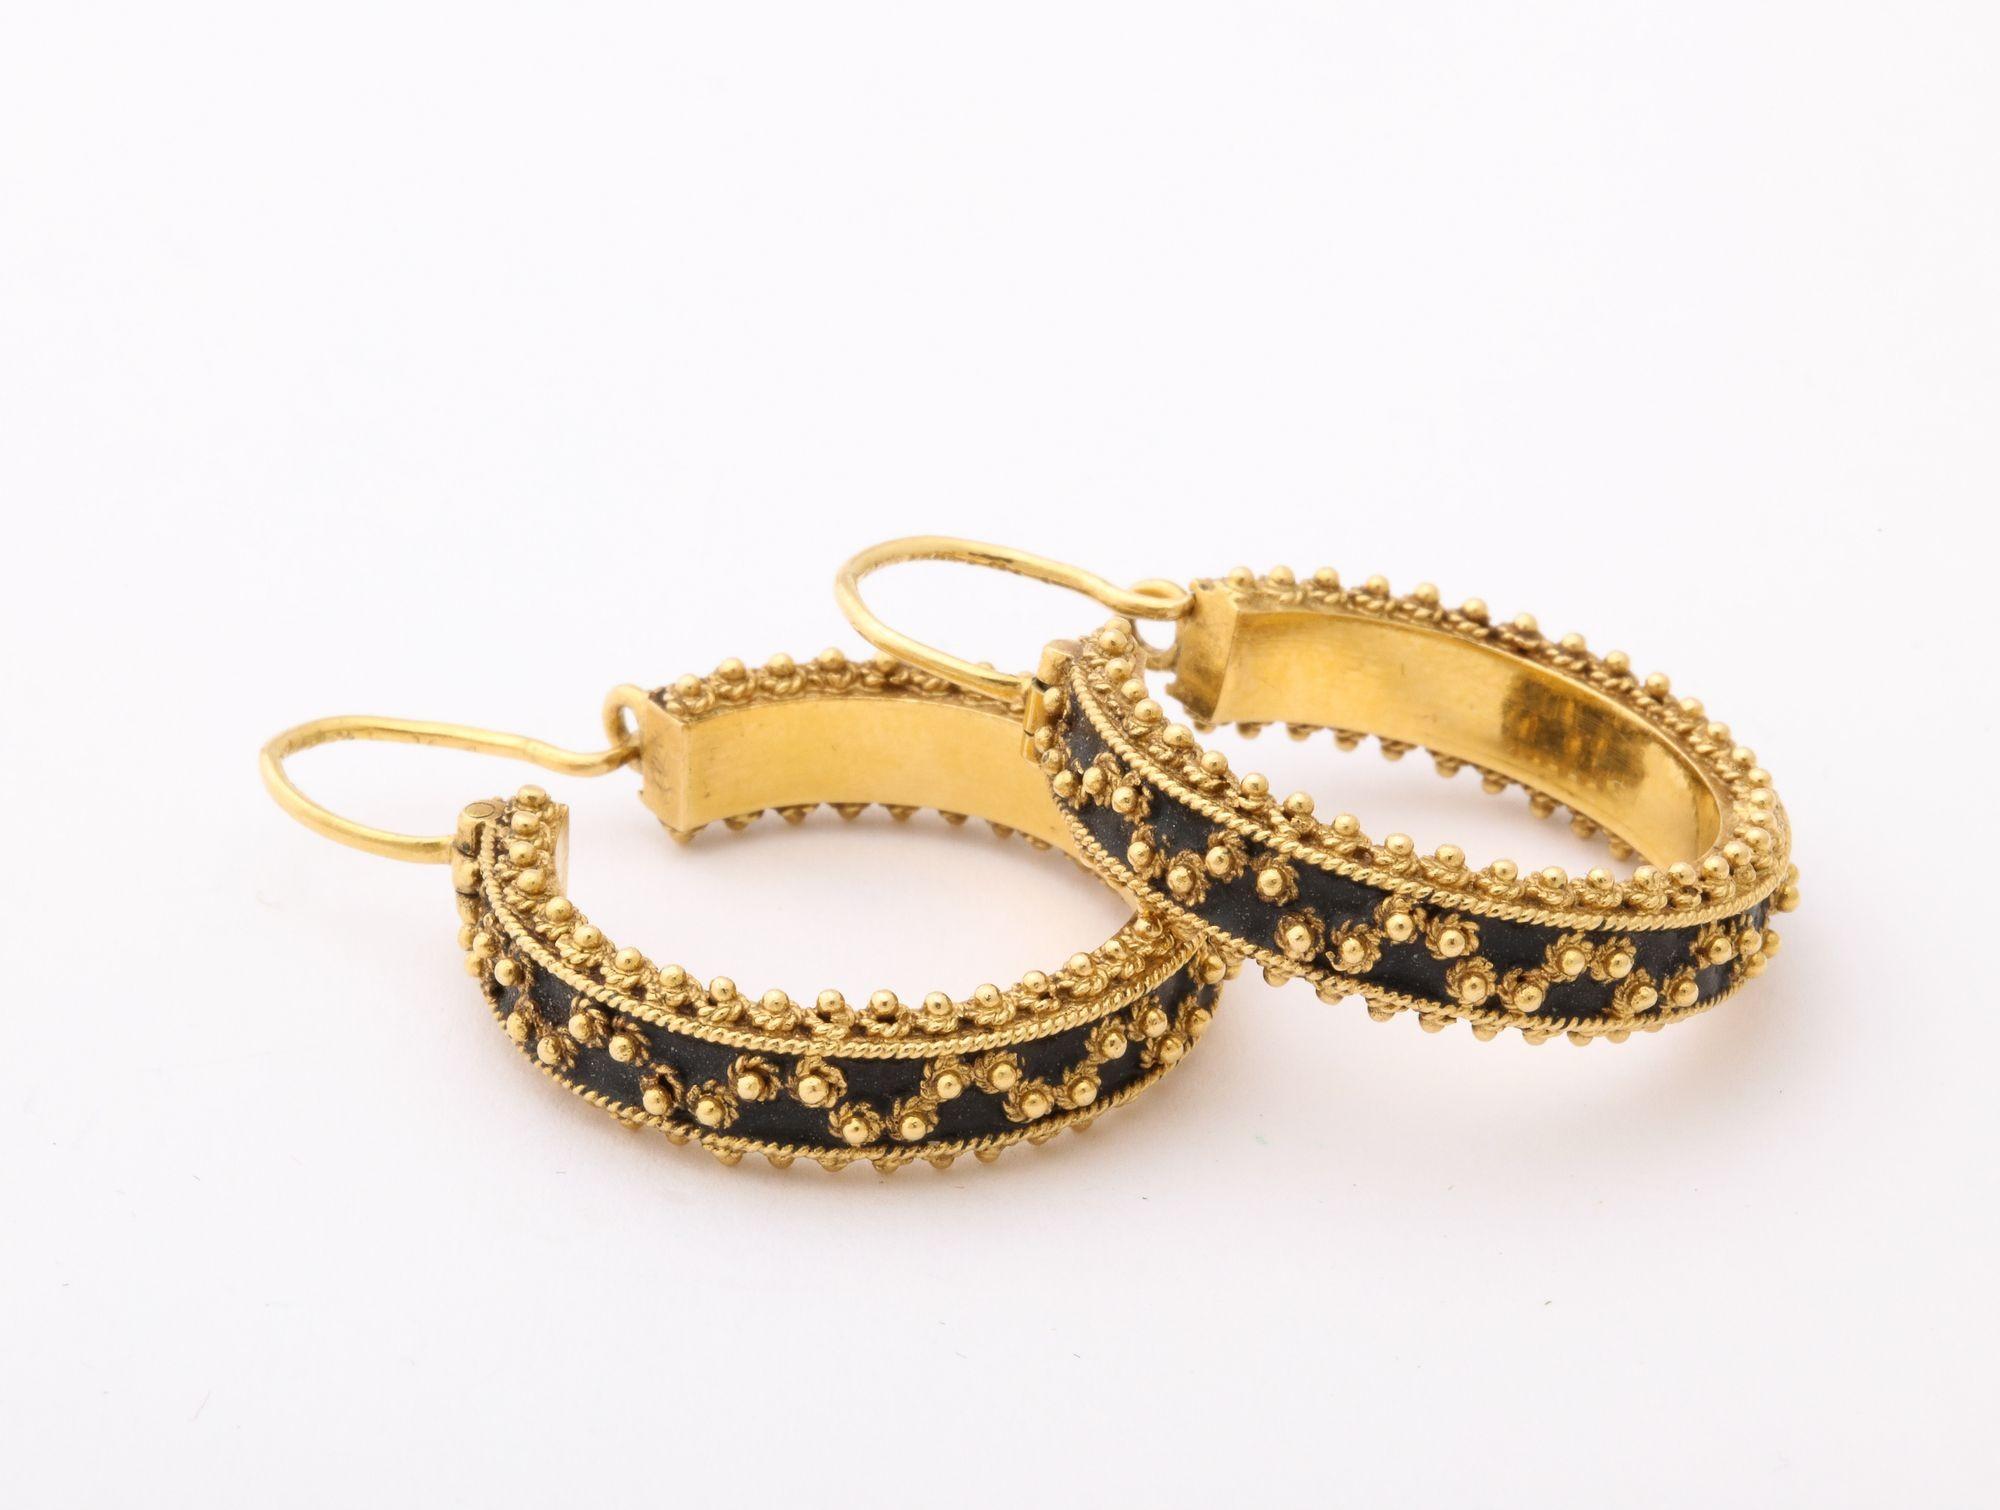 18 k Gold Articulated  Hoop Earrings With Bead Work For Sale 1